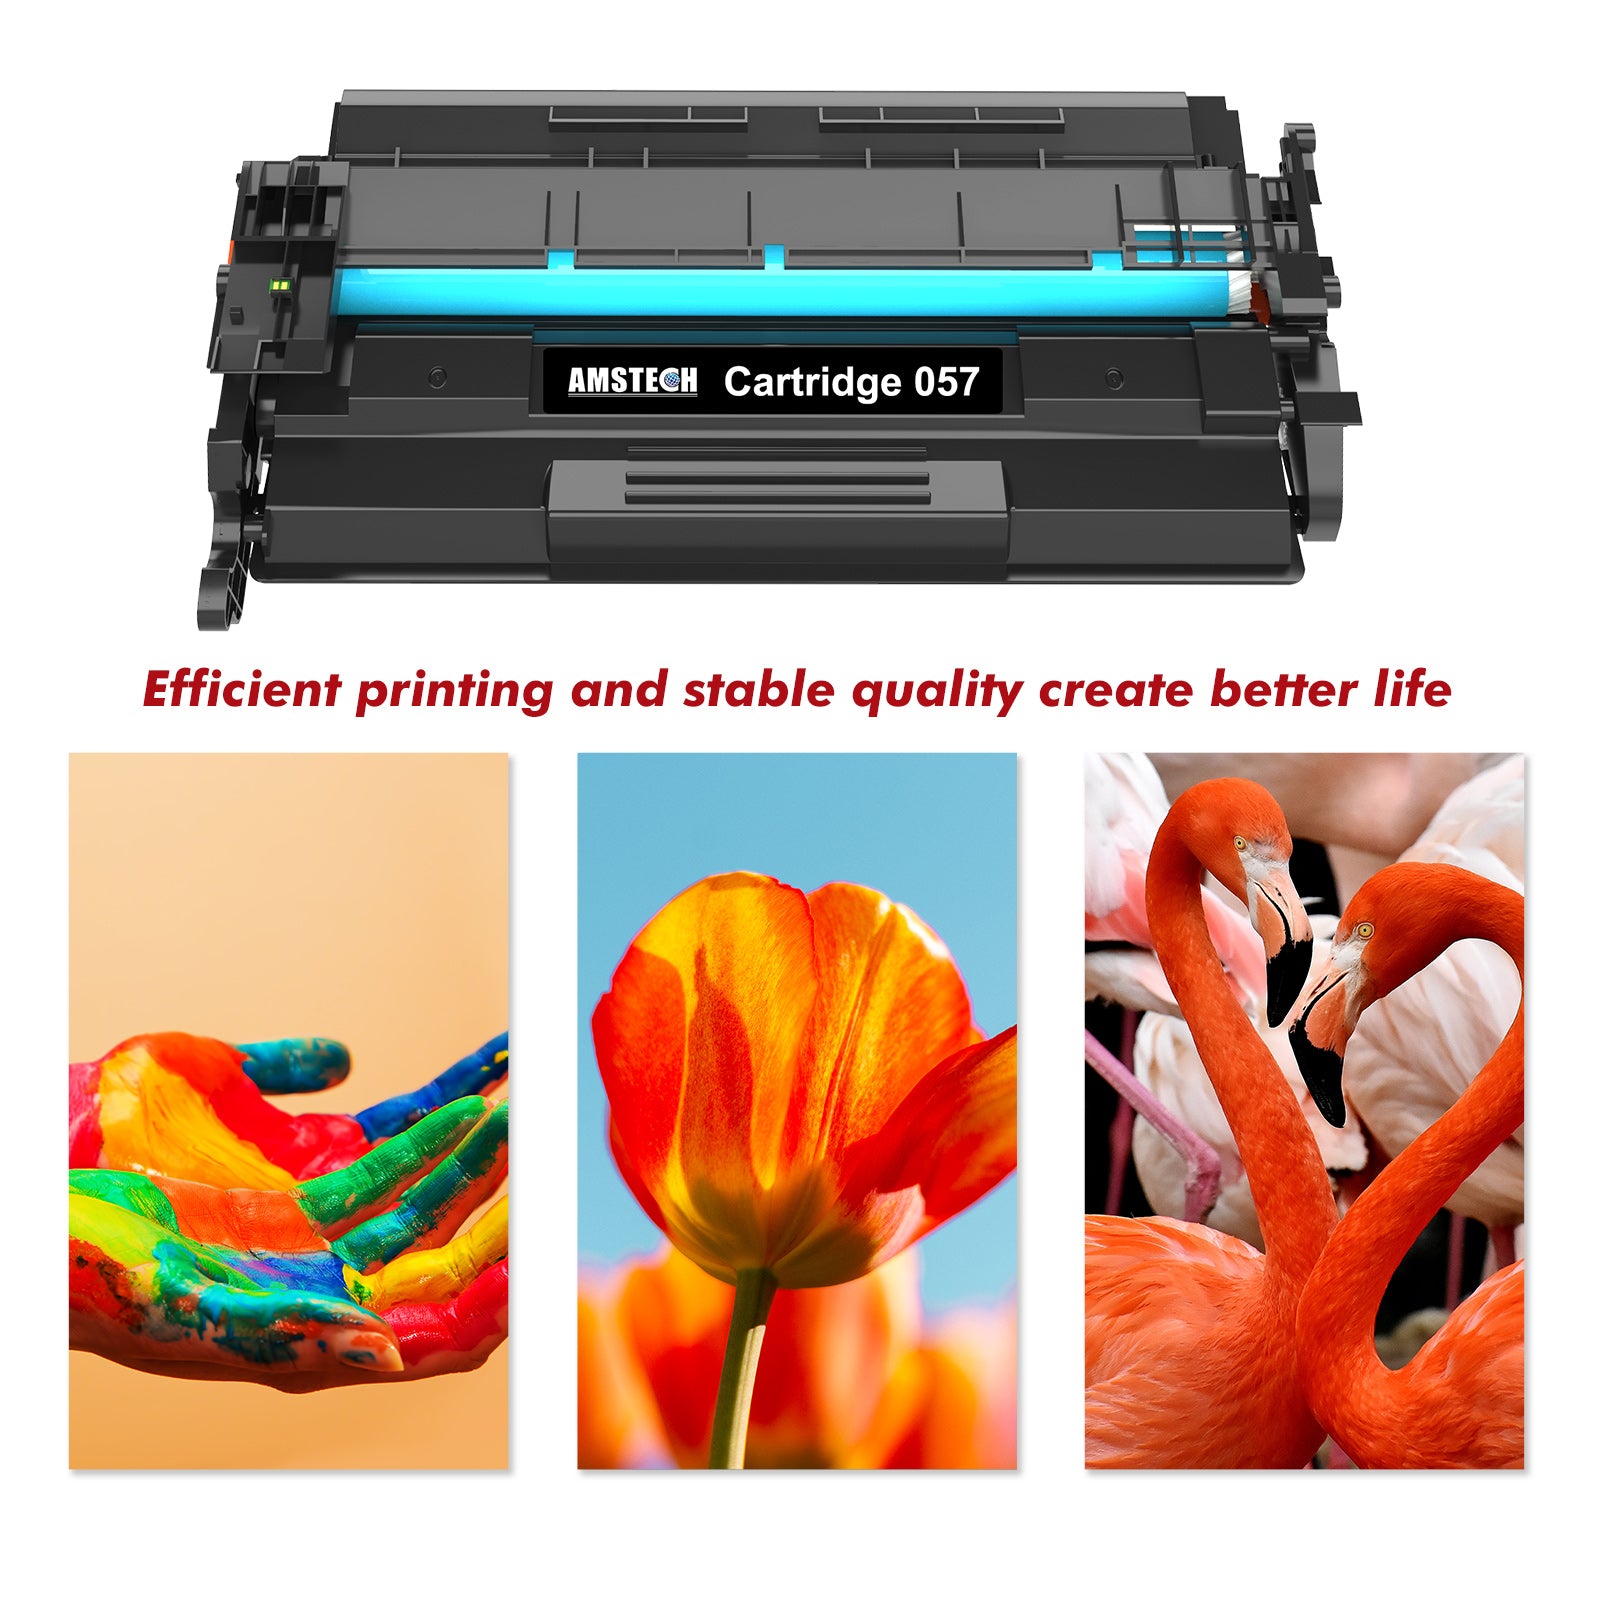  Aztech Compatible 057H Toner Cartridge Replacement for Canon 057H  Cartridge 057 57H CRG-057H for ImageCLASS MF445dw MF448dw MF449dw LBP226dw  LBP227dw LBP228dw High Yield Printer Ink (Black, 2 Pack) : Office Products